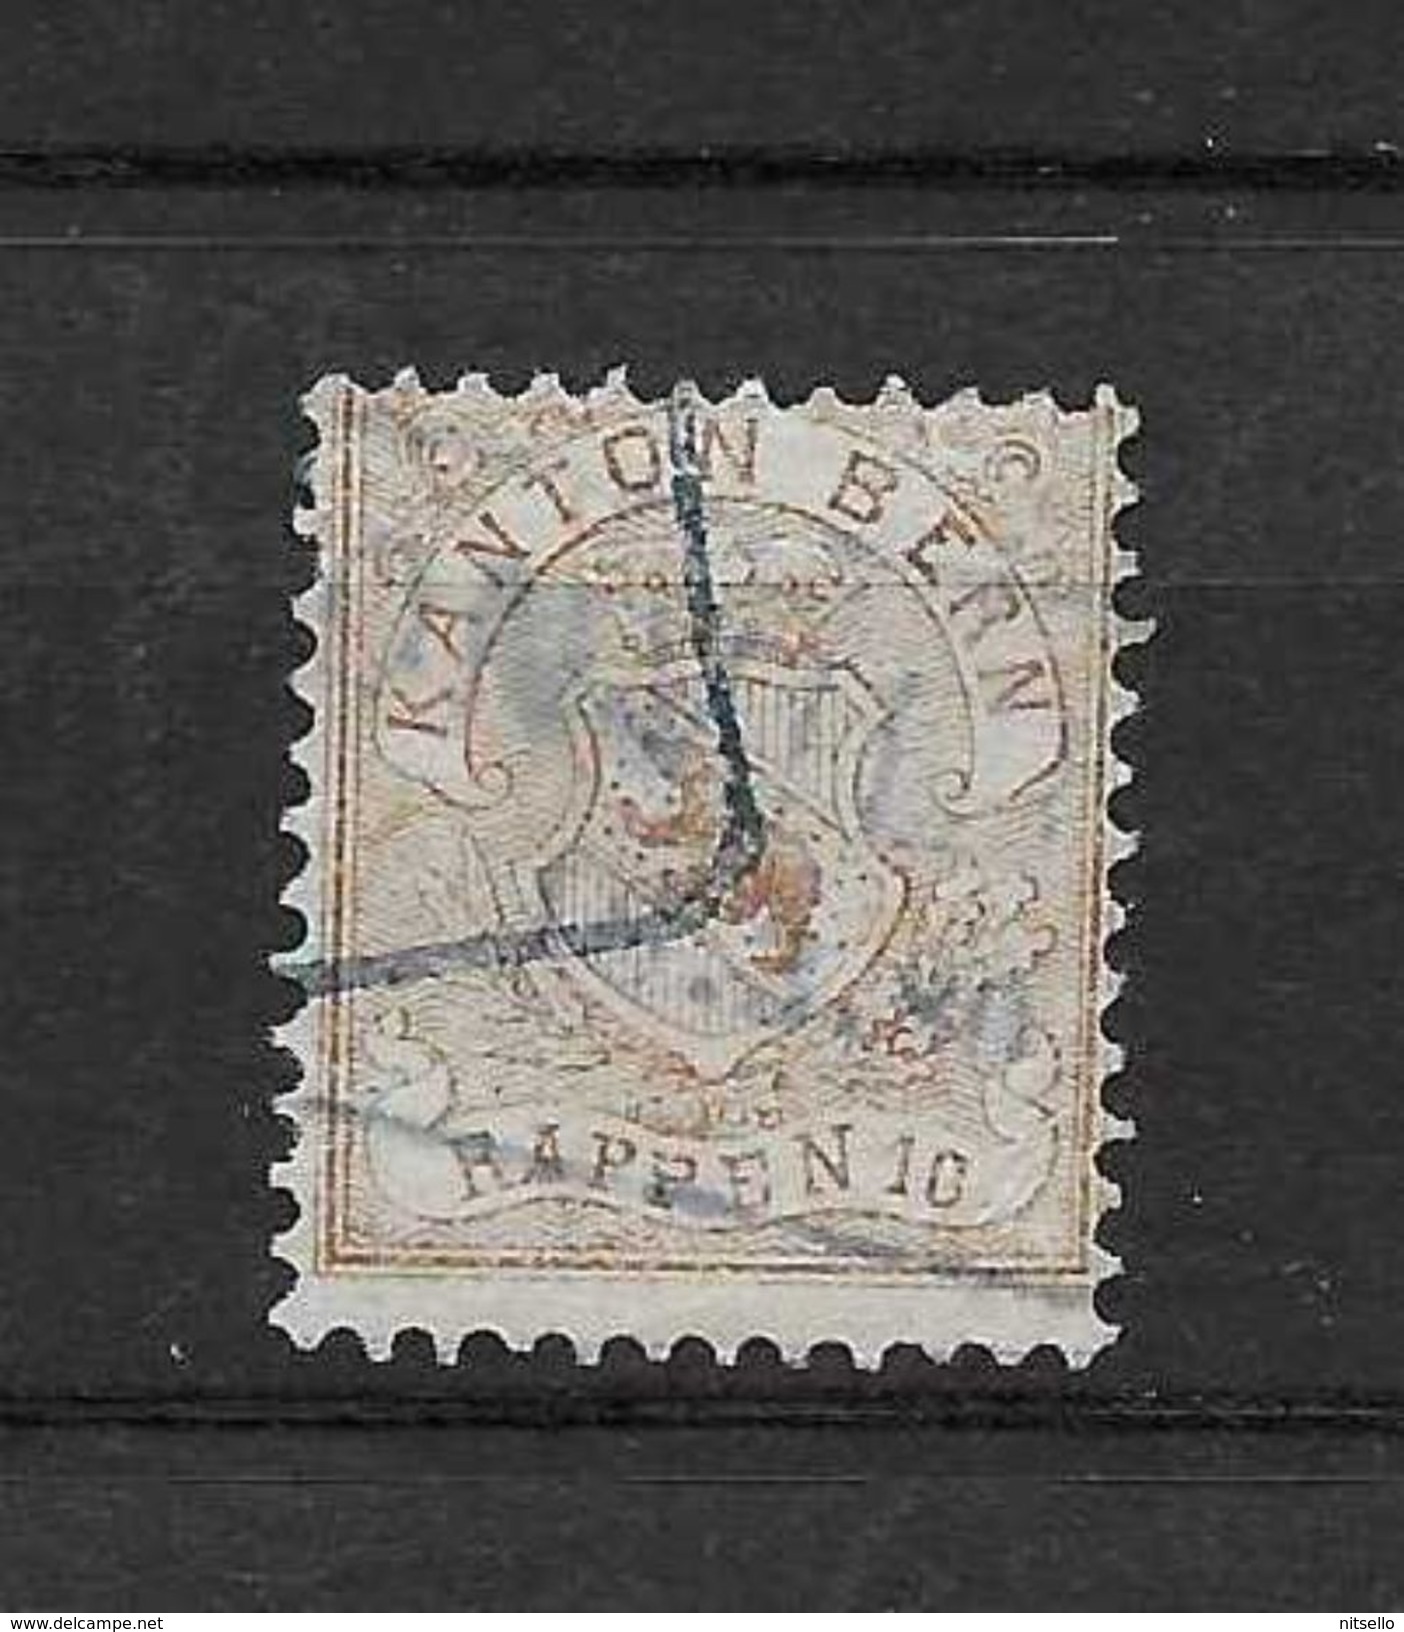 LOTE 1377  /// (C010)  SUIZA CANTON BERN - Revenue Stamps